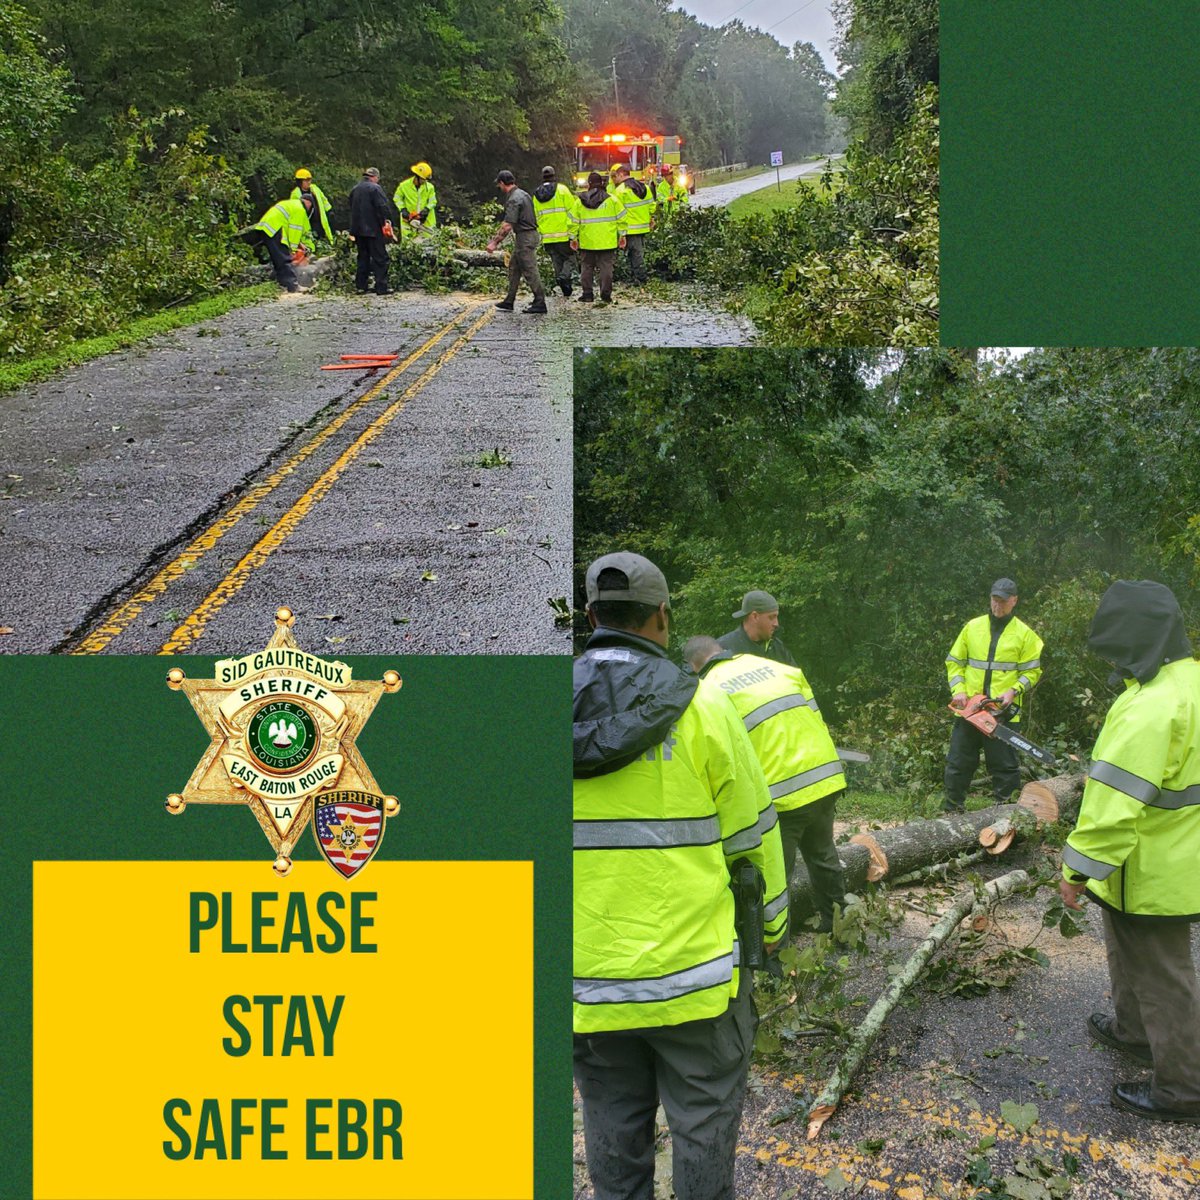 EBRSO Deputies cleared a downed tree on S Tigerbend this evening. “While the road is back open, we are still asking residents if at all possible to shelter in place and stay safe,”Sheriff Sid Gautreaux said. #EBRsafe #HurricaneIda #hurricaneida2021